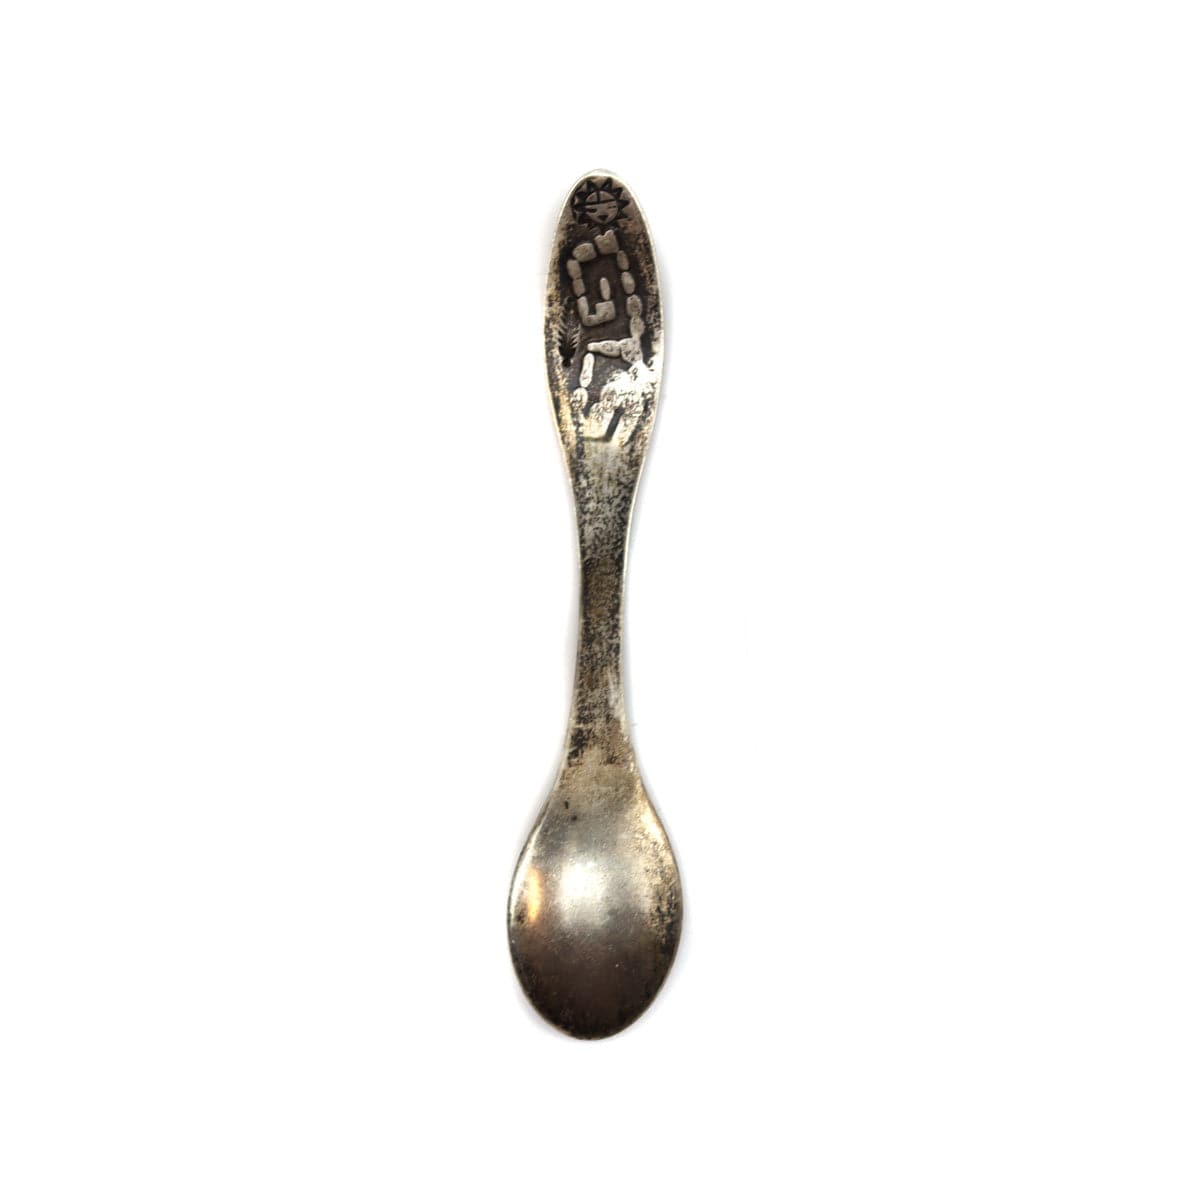 
Hopicrafts - Silver Overlay Spoon c. 1950, 3.75" x 0.75" (J15644-005)1